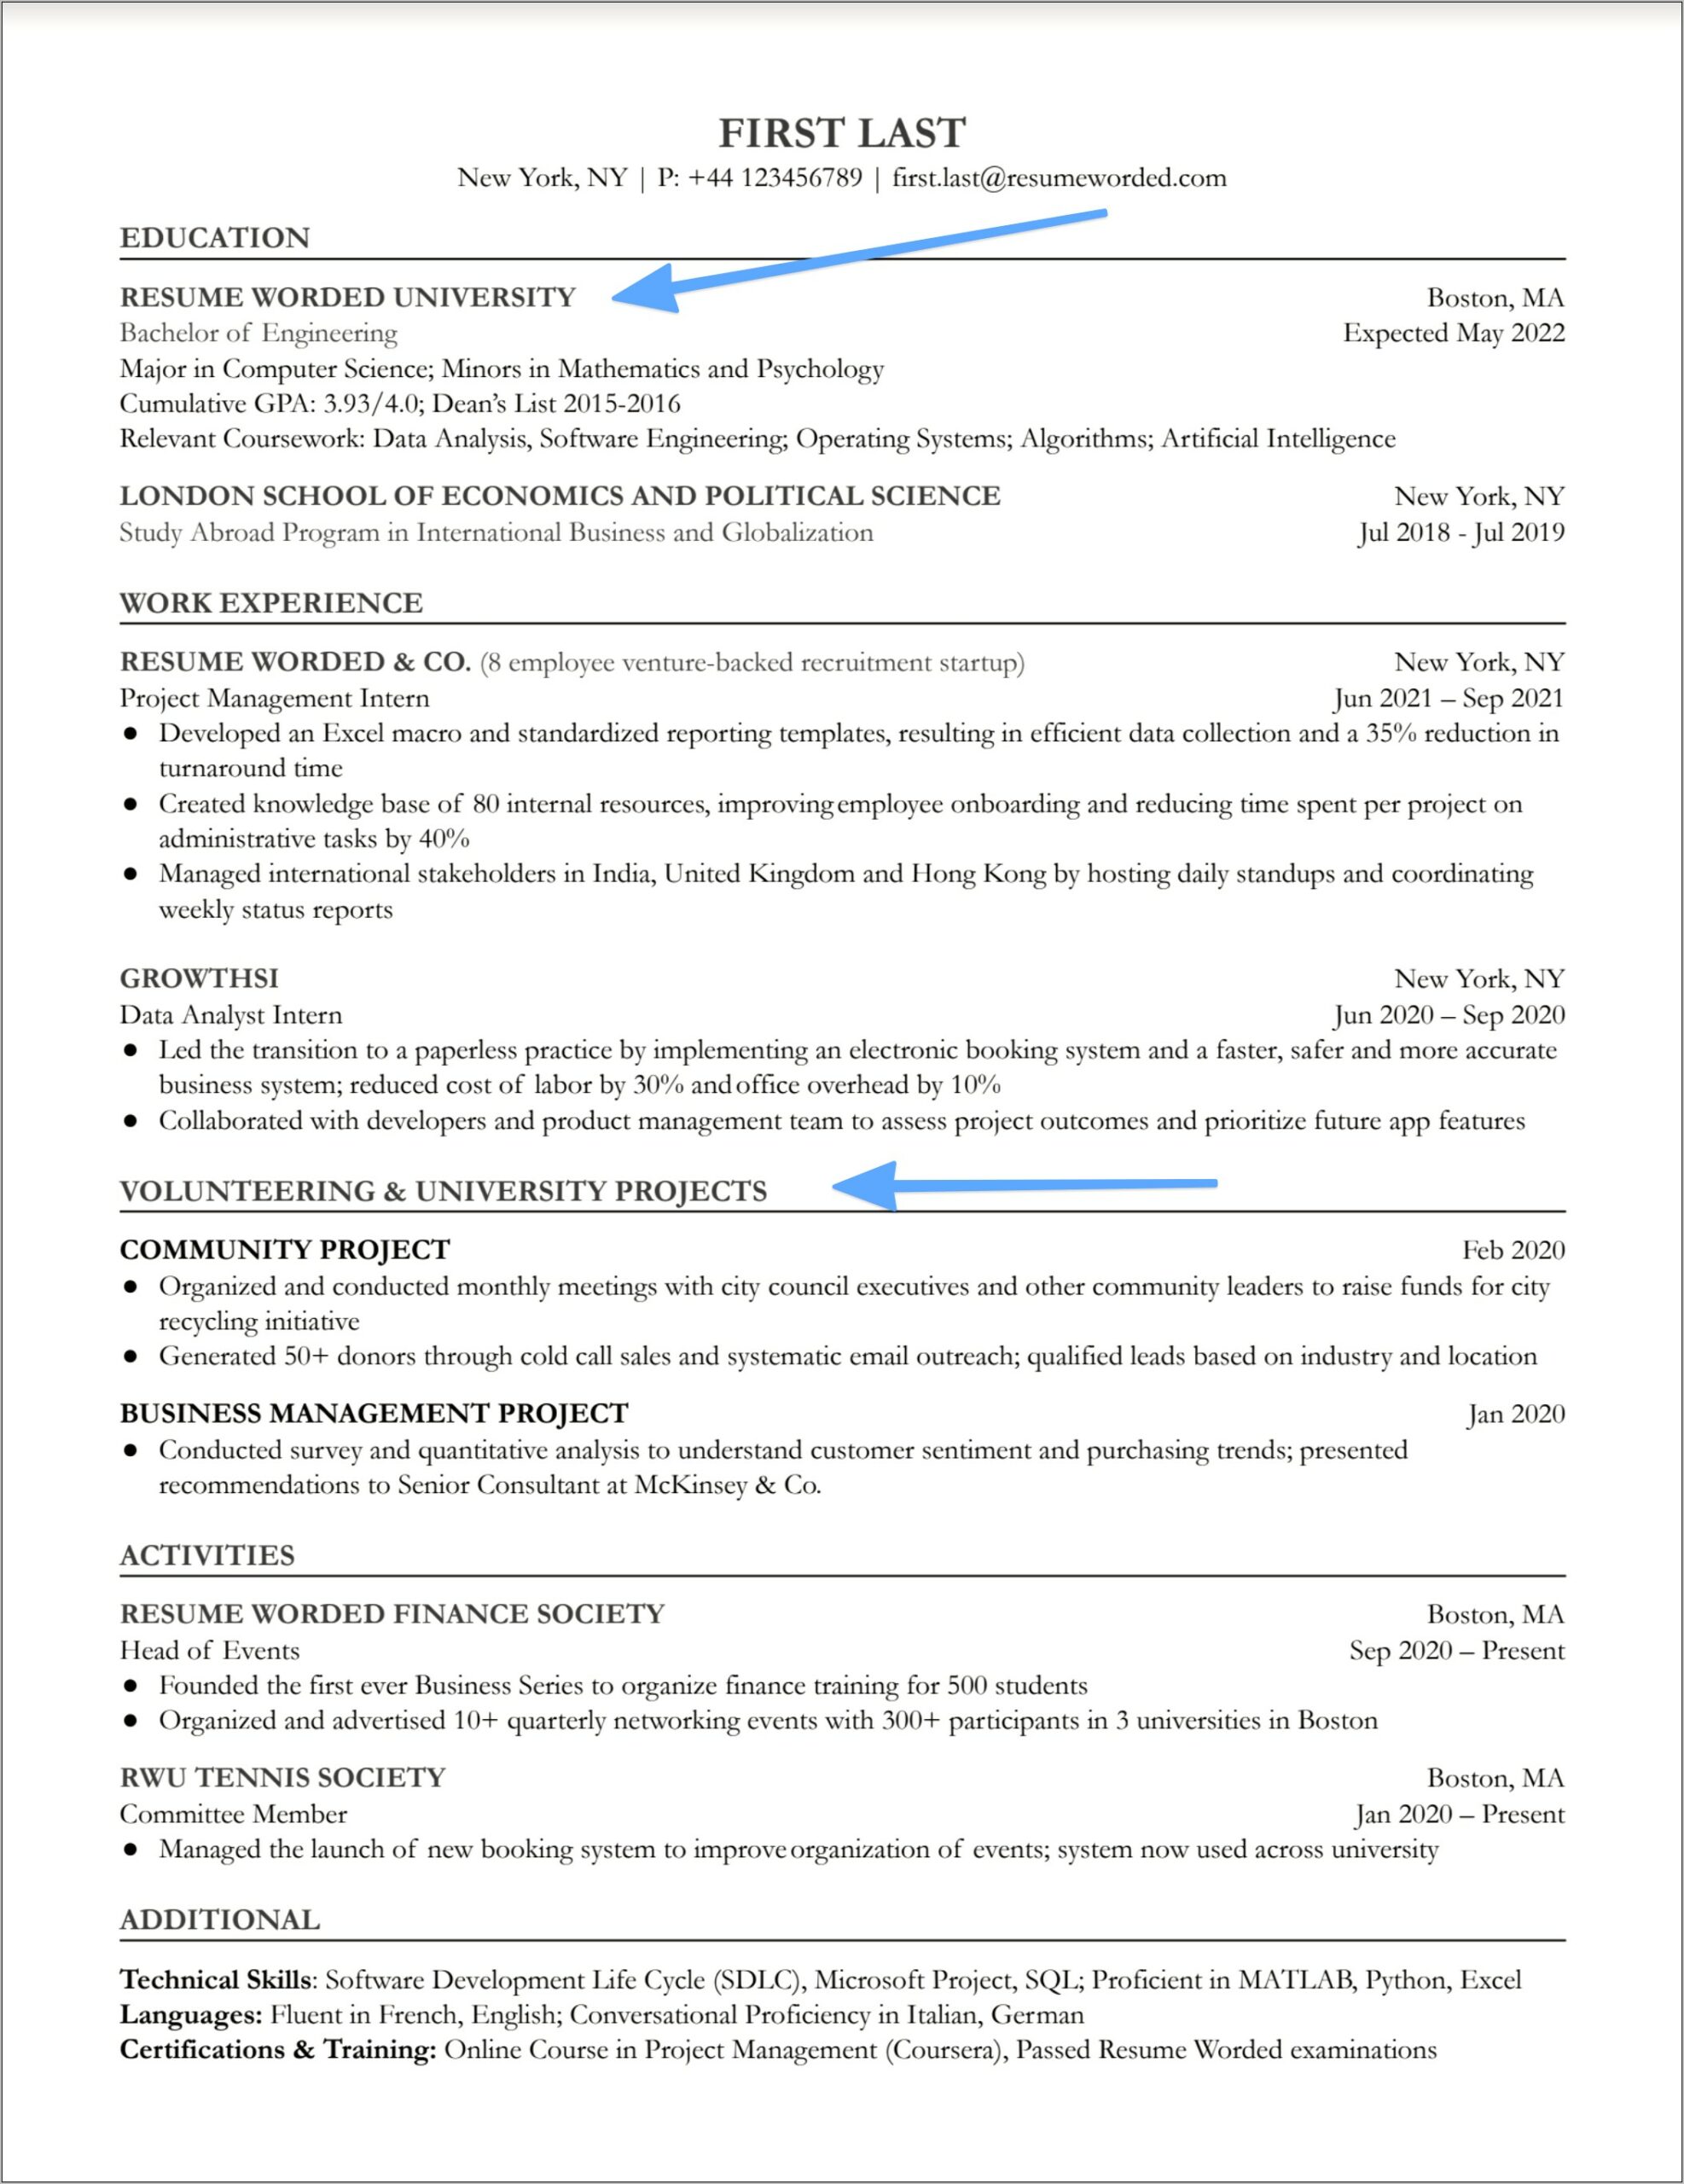 Intern Residential Property Manager Resume